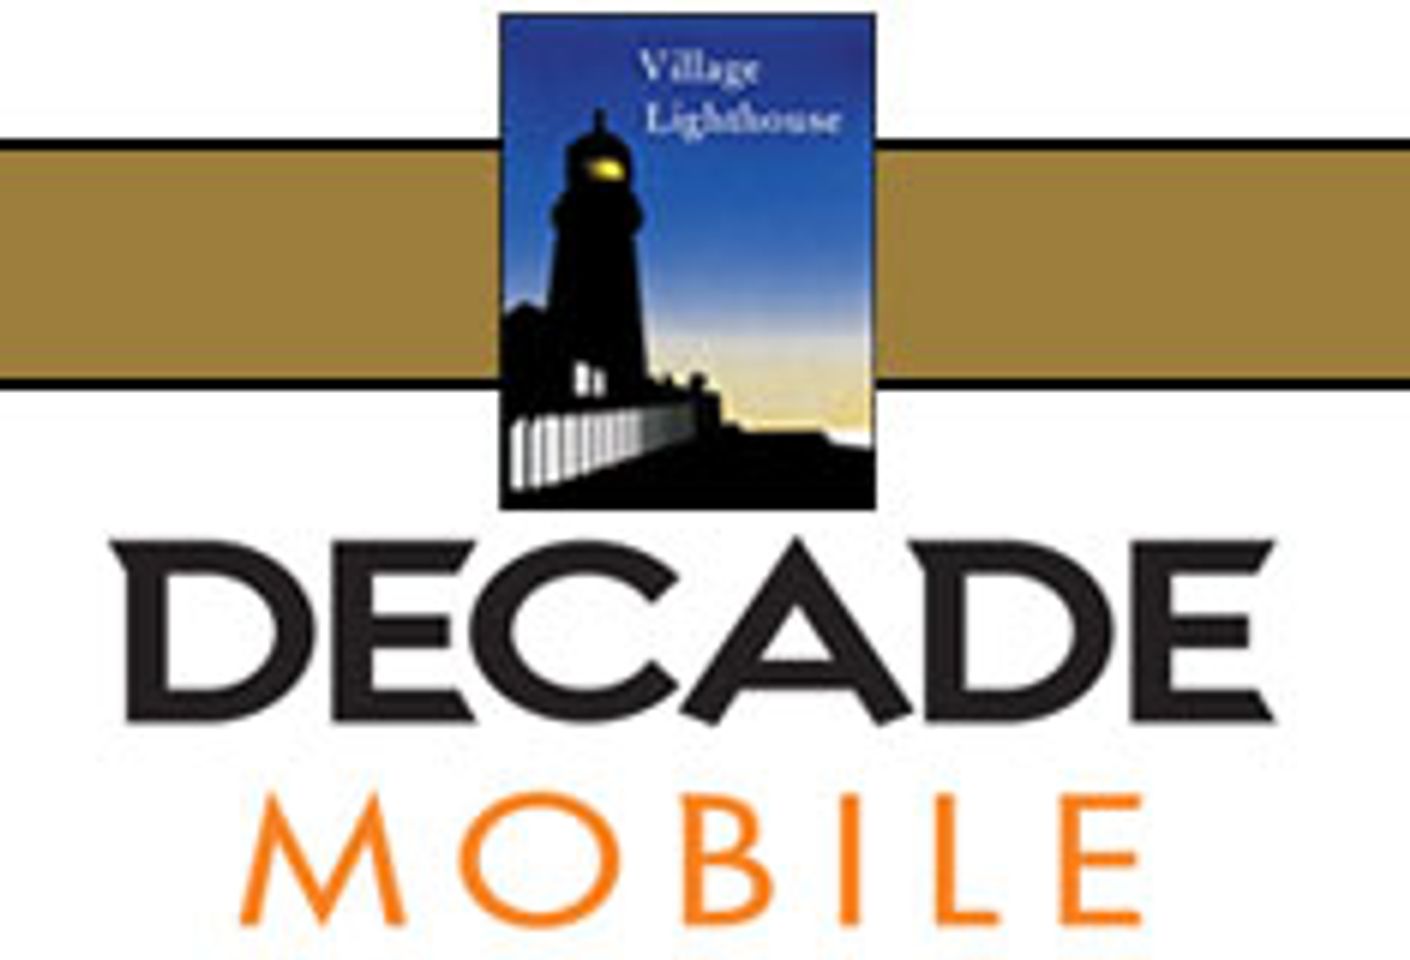 Village Lighthouse Makes Deal with Decade Mobile